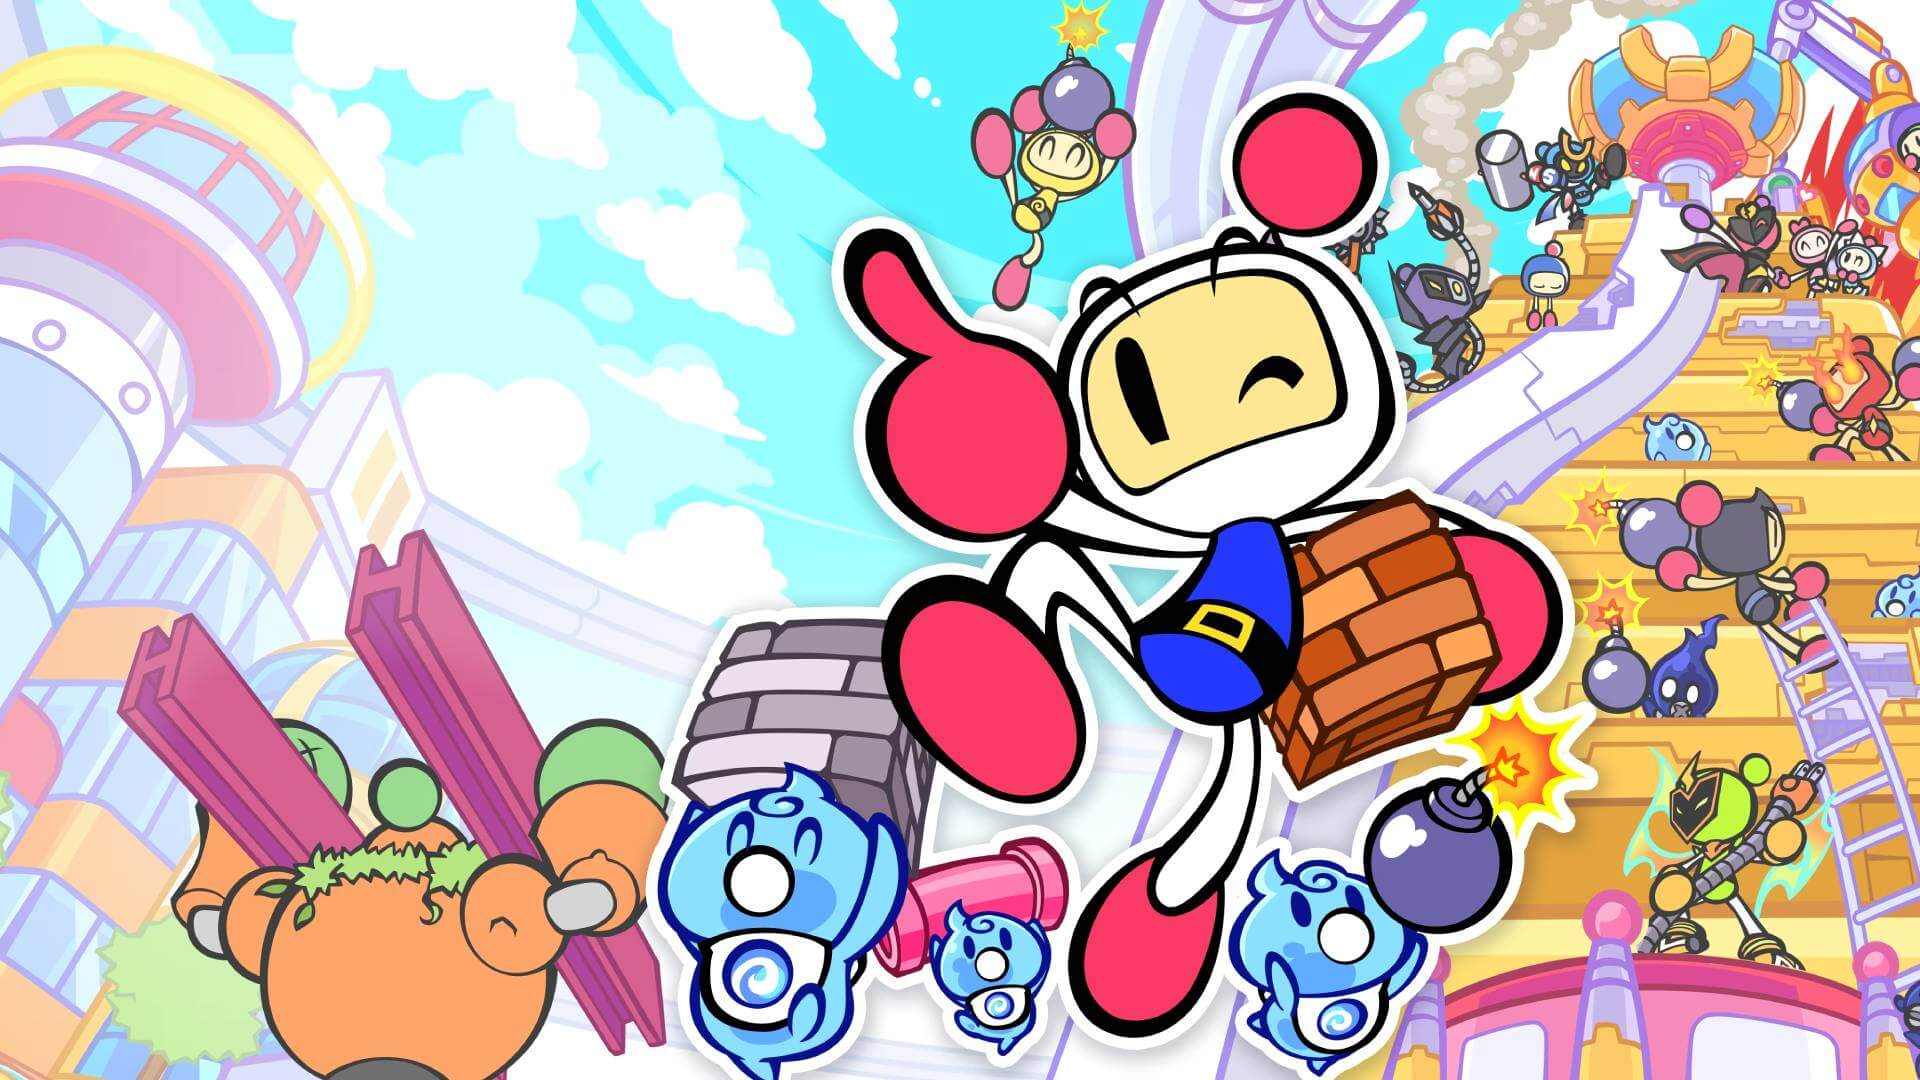 Super Bomberman R Online Review - A Fun Battle Royale, If You Can Play It ( PS4)